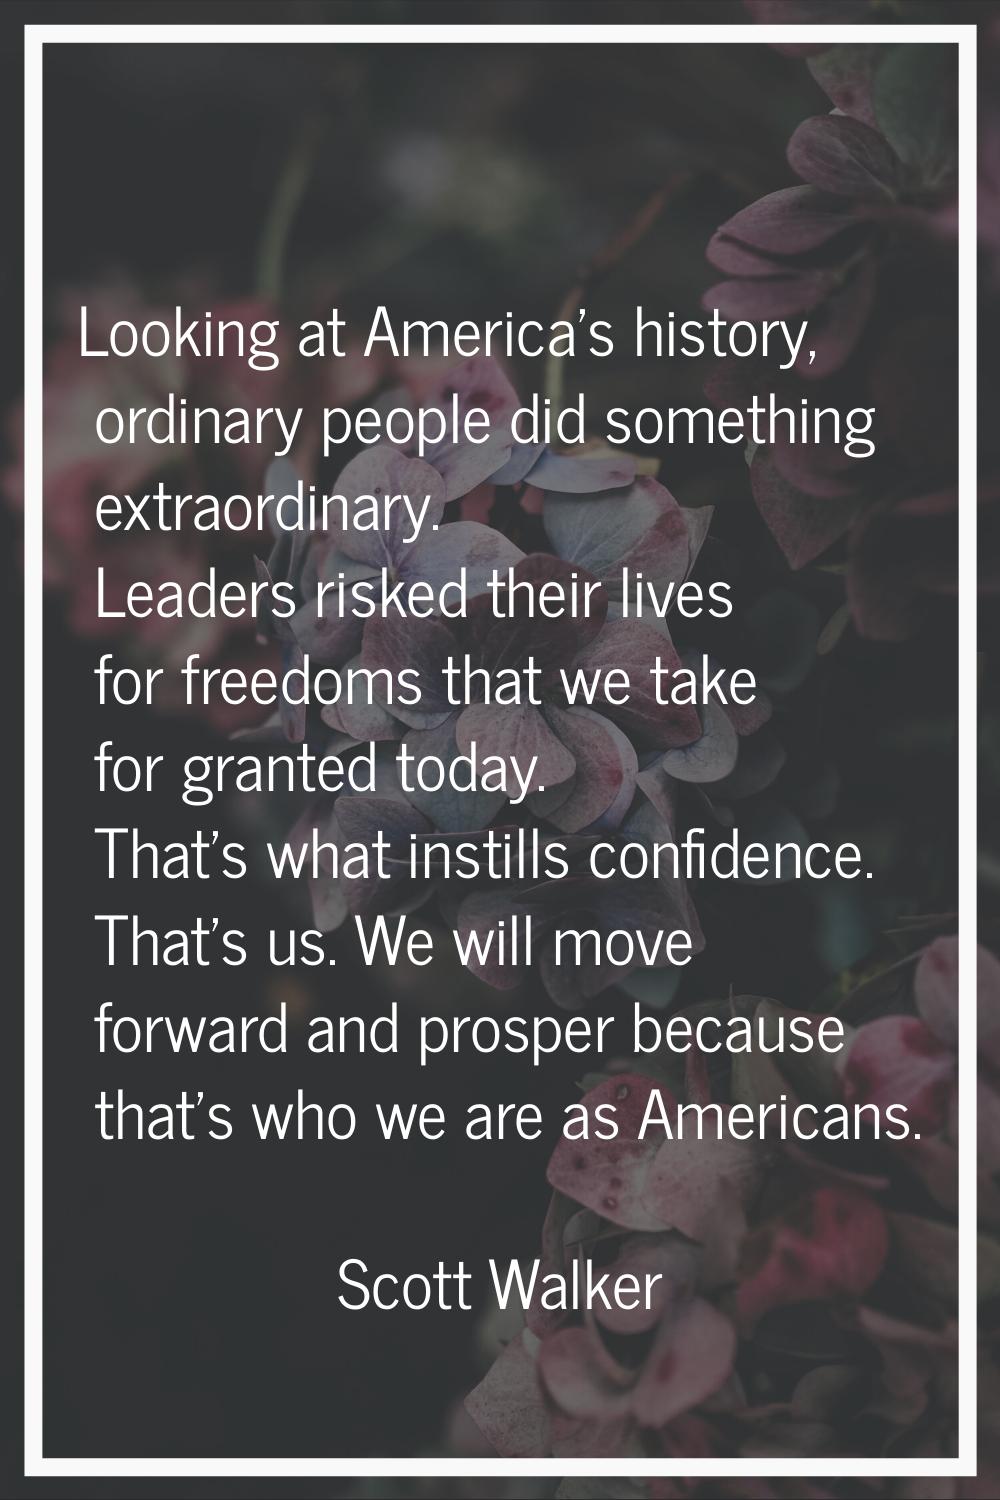 Looking at America's history, ordinary people did something extraordinary. Leaders risked their liv